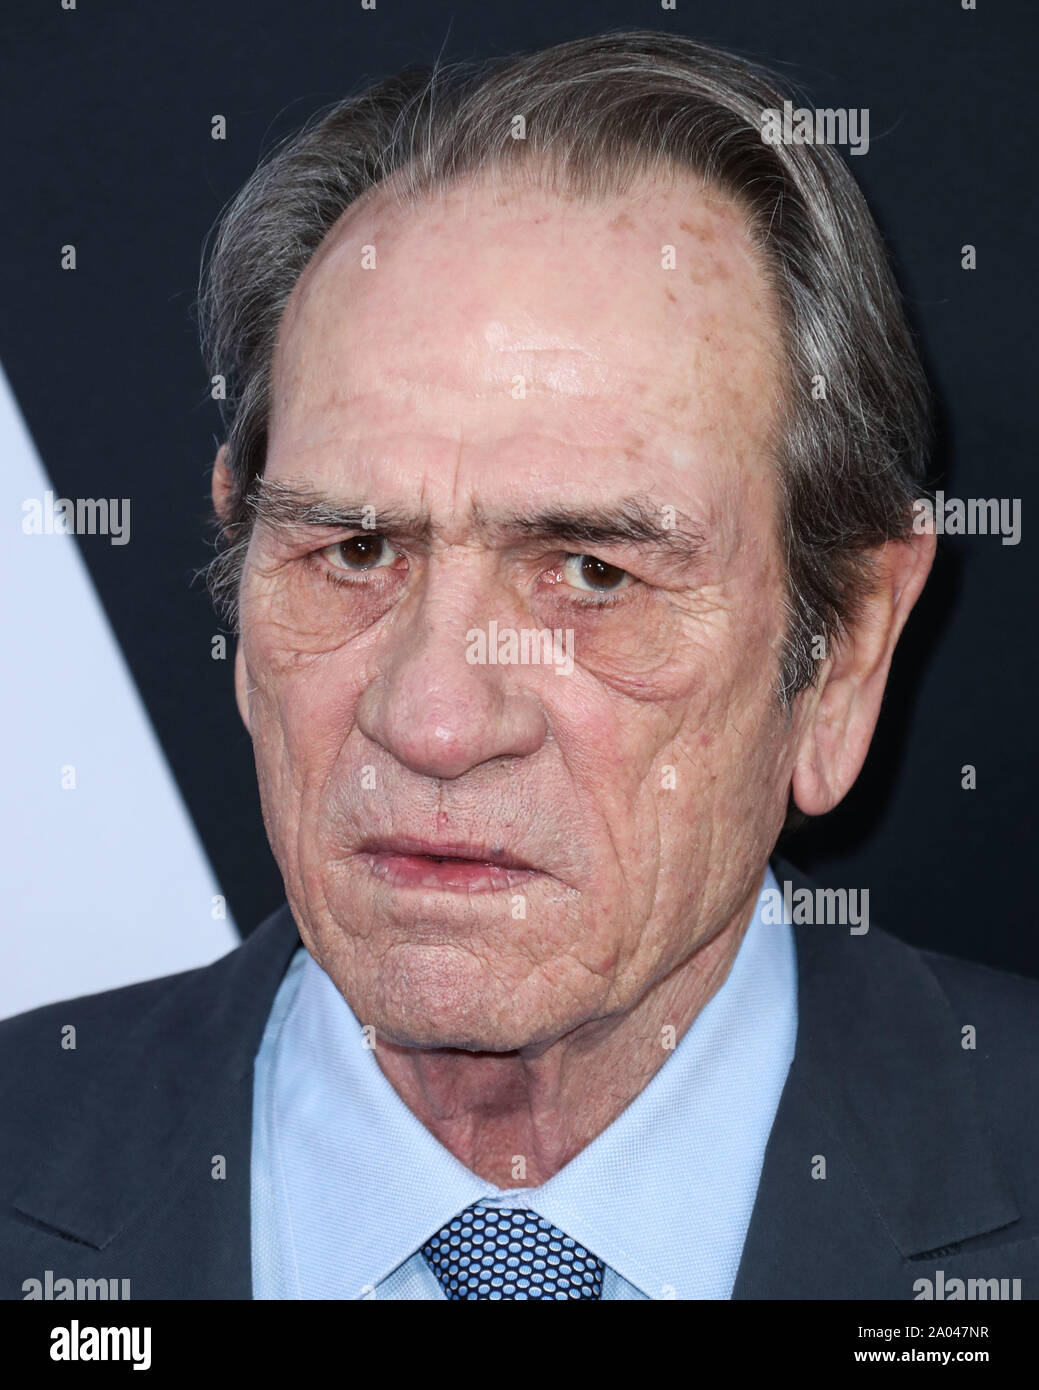 Hollywood, United States. 18th Sep, 2019. HOLLYWOOD, LOS ANGELES, CALIFORNIA, USA - SEPTEMBER 18: Actor Tommy Lee Jones arrives at the Los Angeles Premiere Of 20th Century Fox's 'Ad Astra' held at ArcLight Cinemas Hollywood Cinerama Dome on August 18, 2019 in Hollywood, Los Angeles, California, United States. (Photo by Xavier Collin/Image Press Agency) Credit: Image Press Agency/Alamy Live News Stock Photo